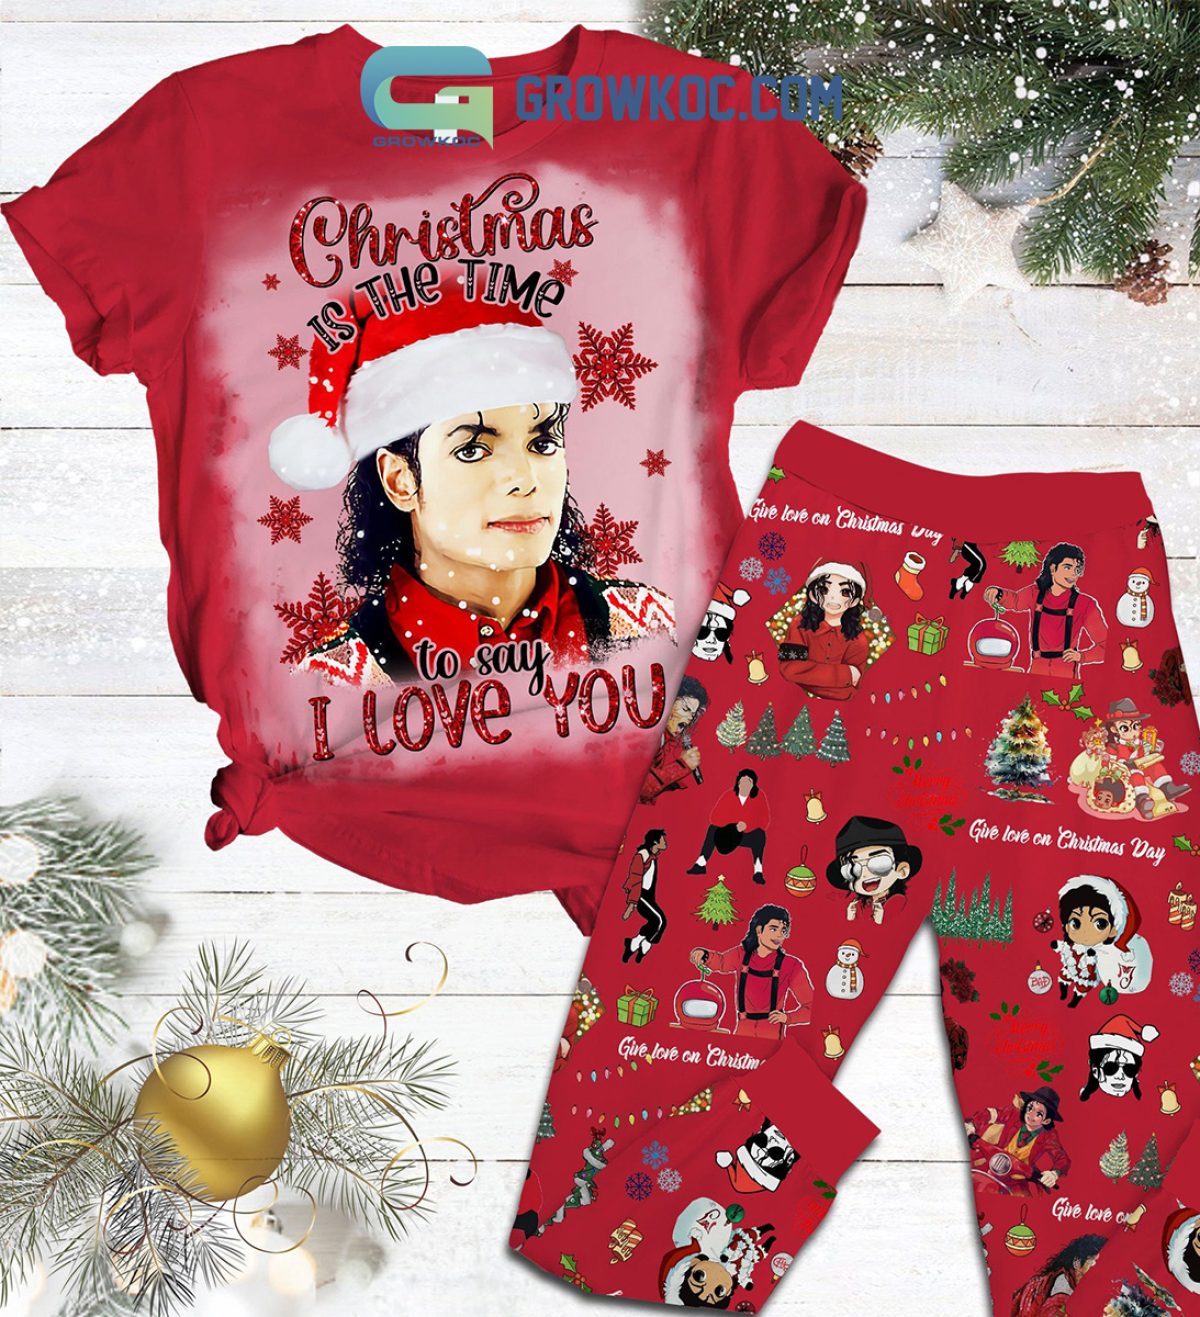 People always ask where to get christmas pjs micles westmall has in st